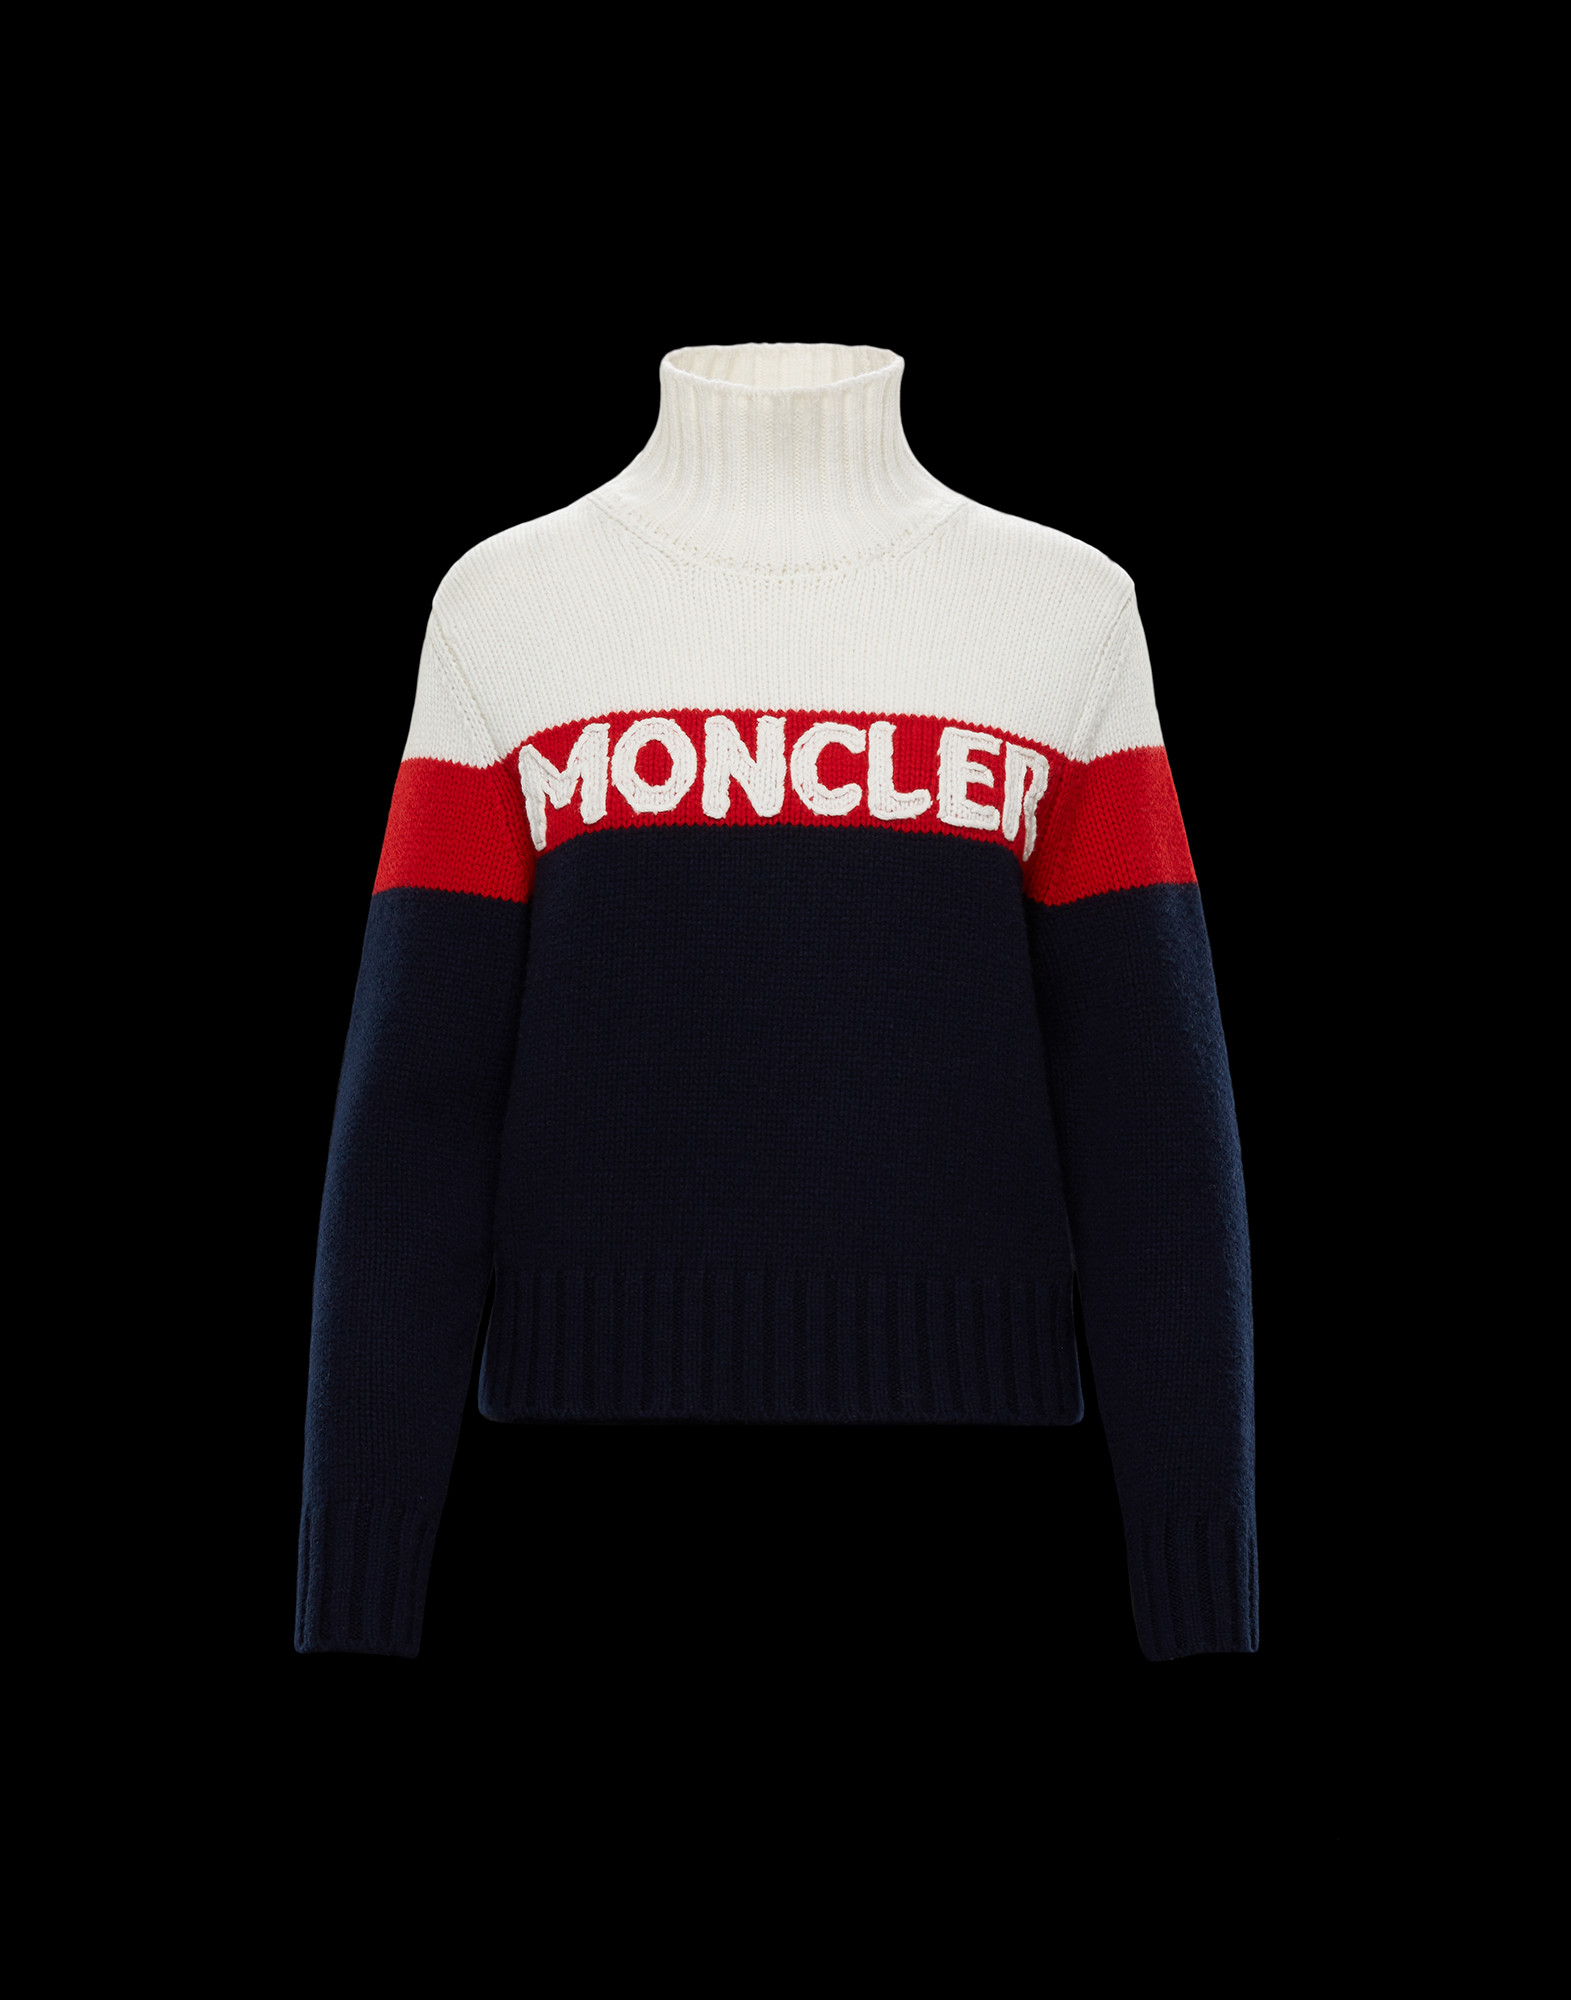 Clothing and down jackets for men, women and kids | Moncler